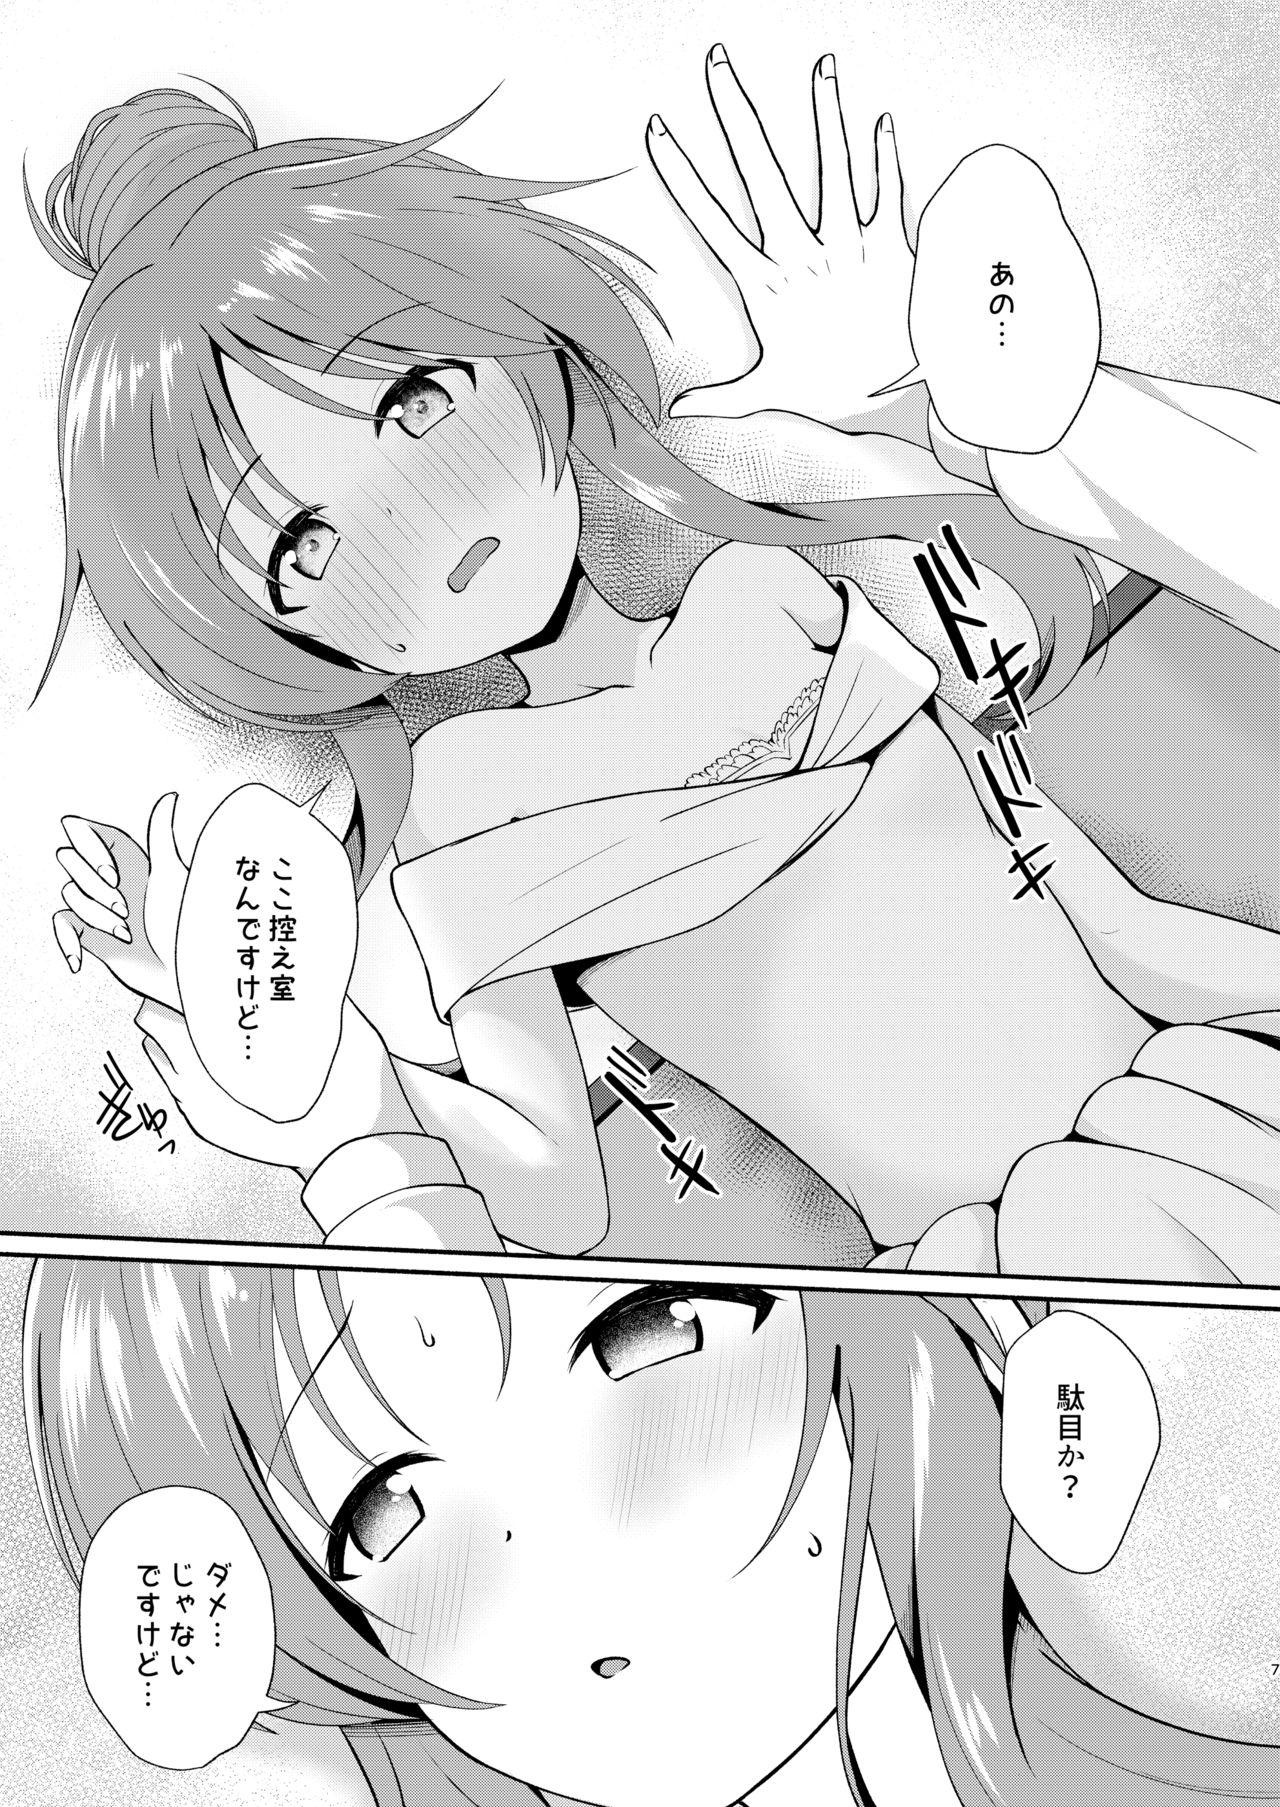 Titjob Aiko Myu Endless 8 - The idolmaster Colombia - Page 7